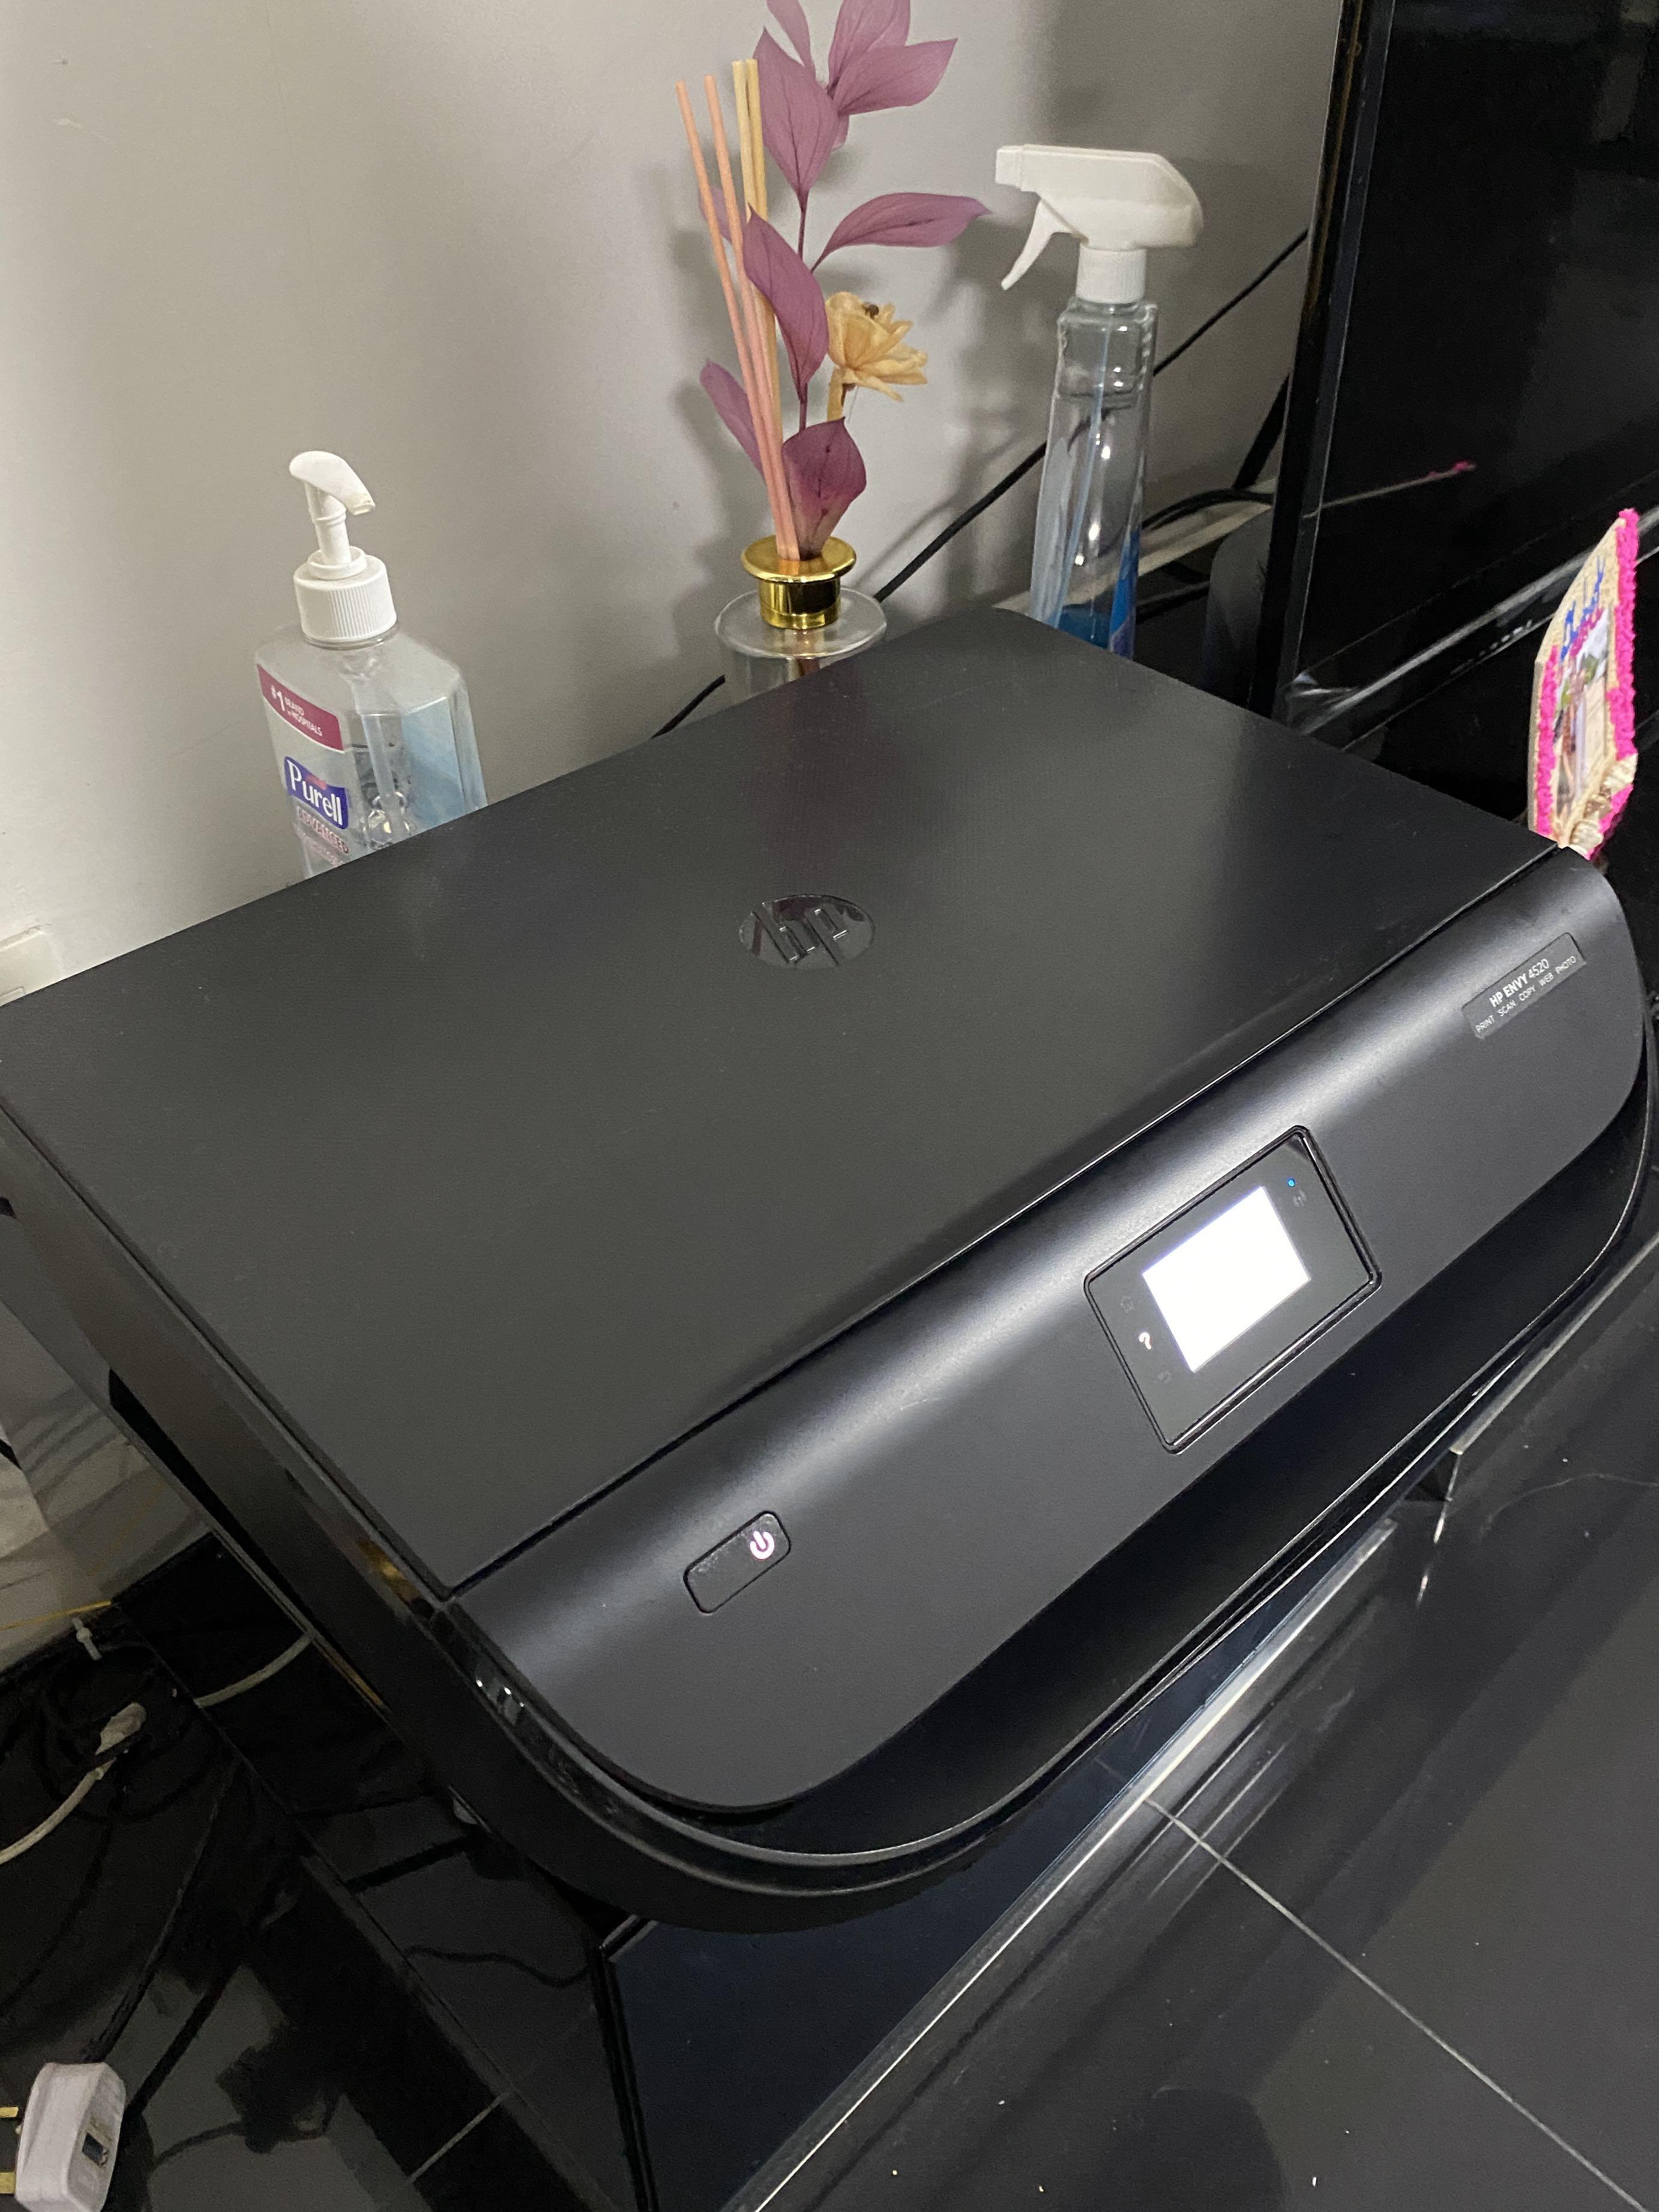 Hp Envy 4520 All In One Printer Computers And Tech Printers Scanners And Copiers On Carousell 2120